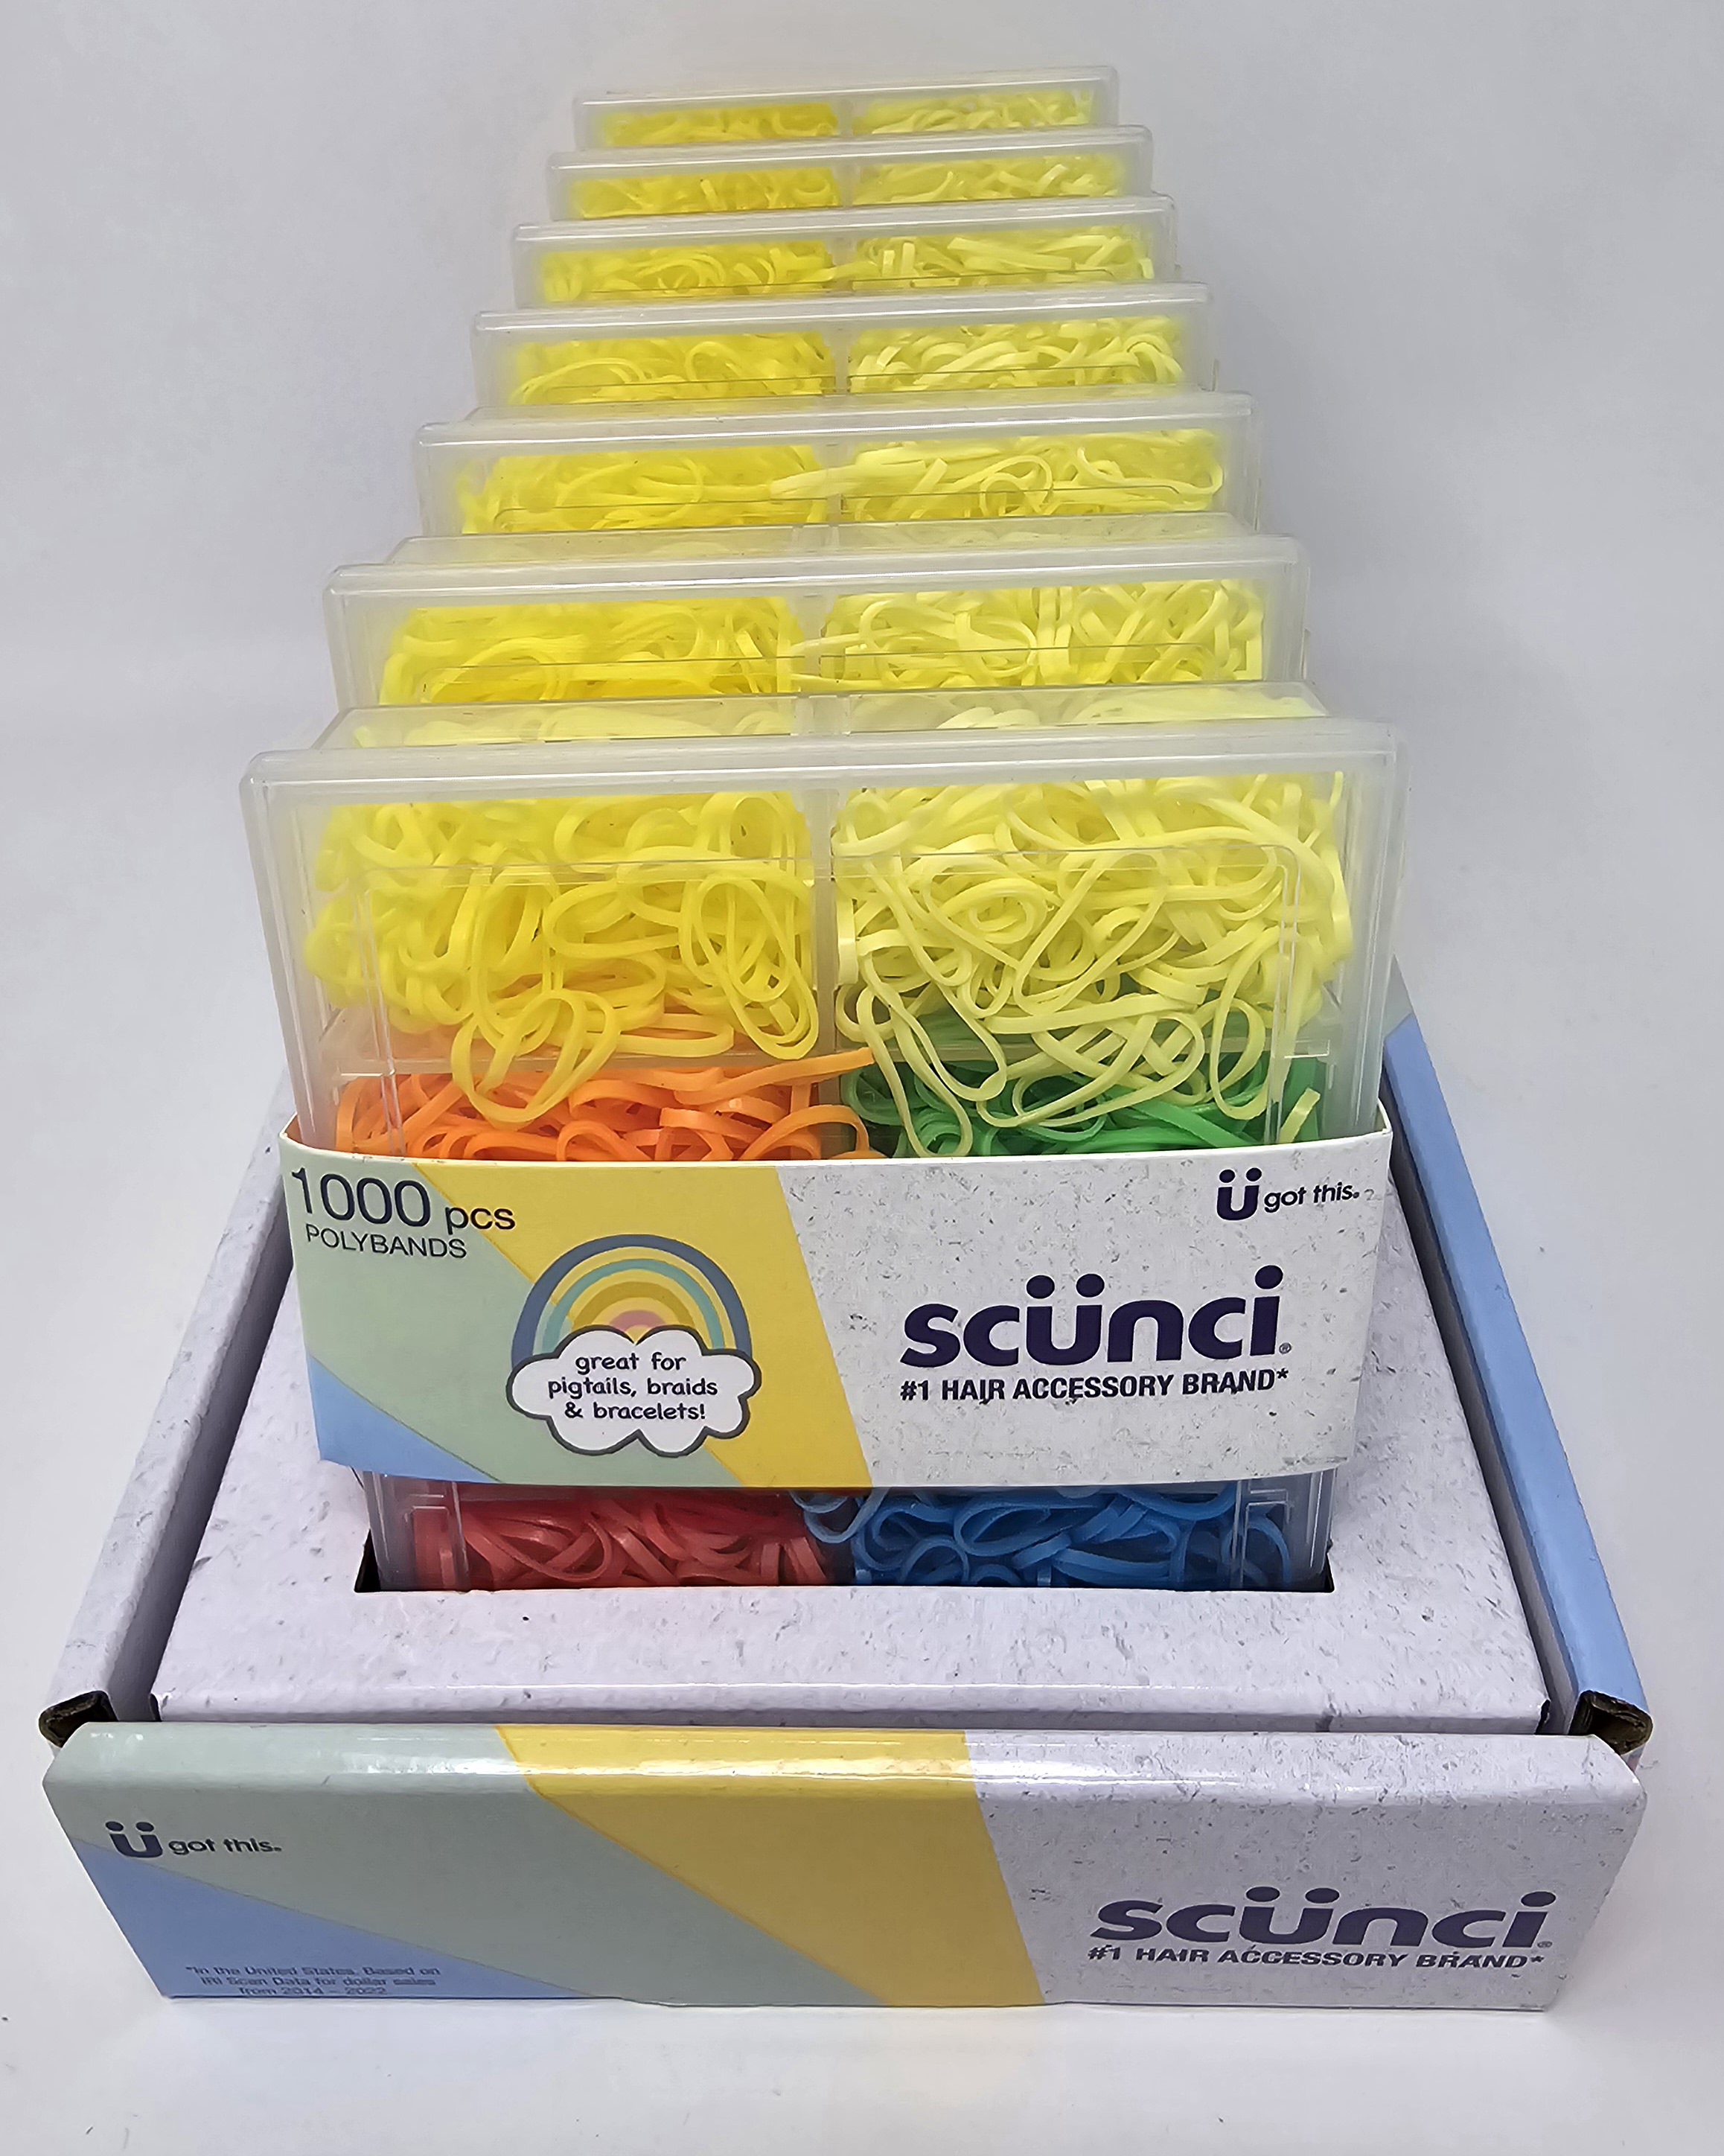 SCUNCI NO DAMAGE POLYBANDS IN REUSABLE CASE, 1000 POLYBANDS PER CASE. 7 UNITS PER PDQ DISPLAY